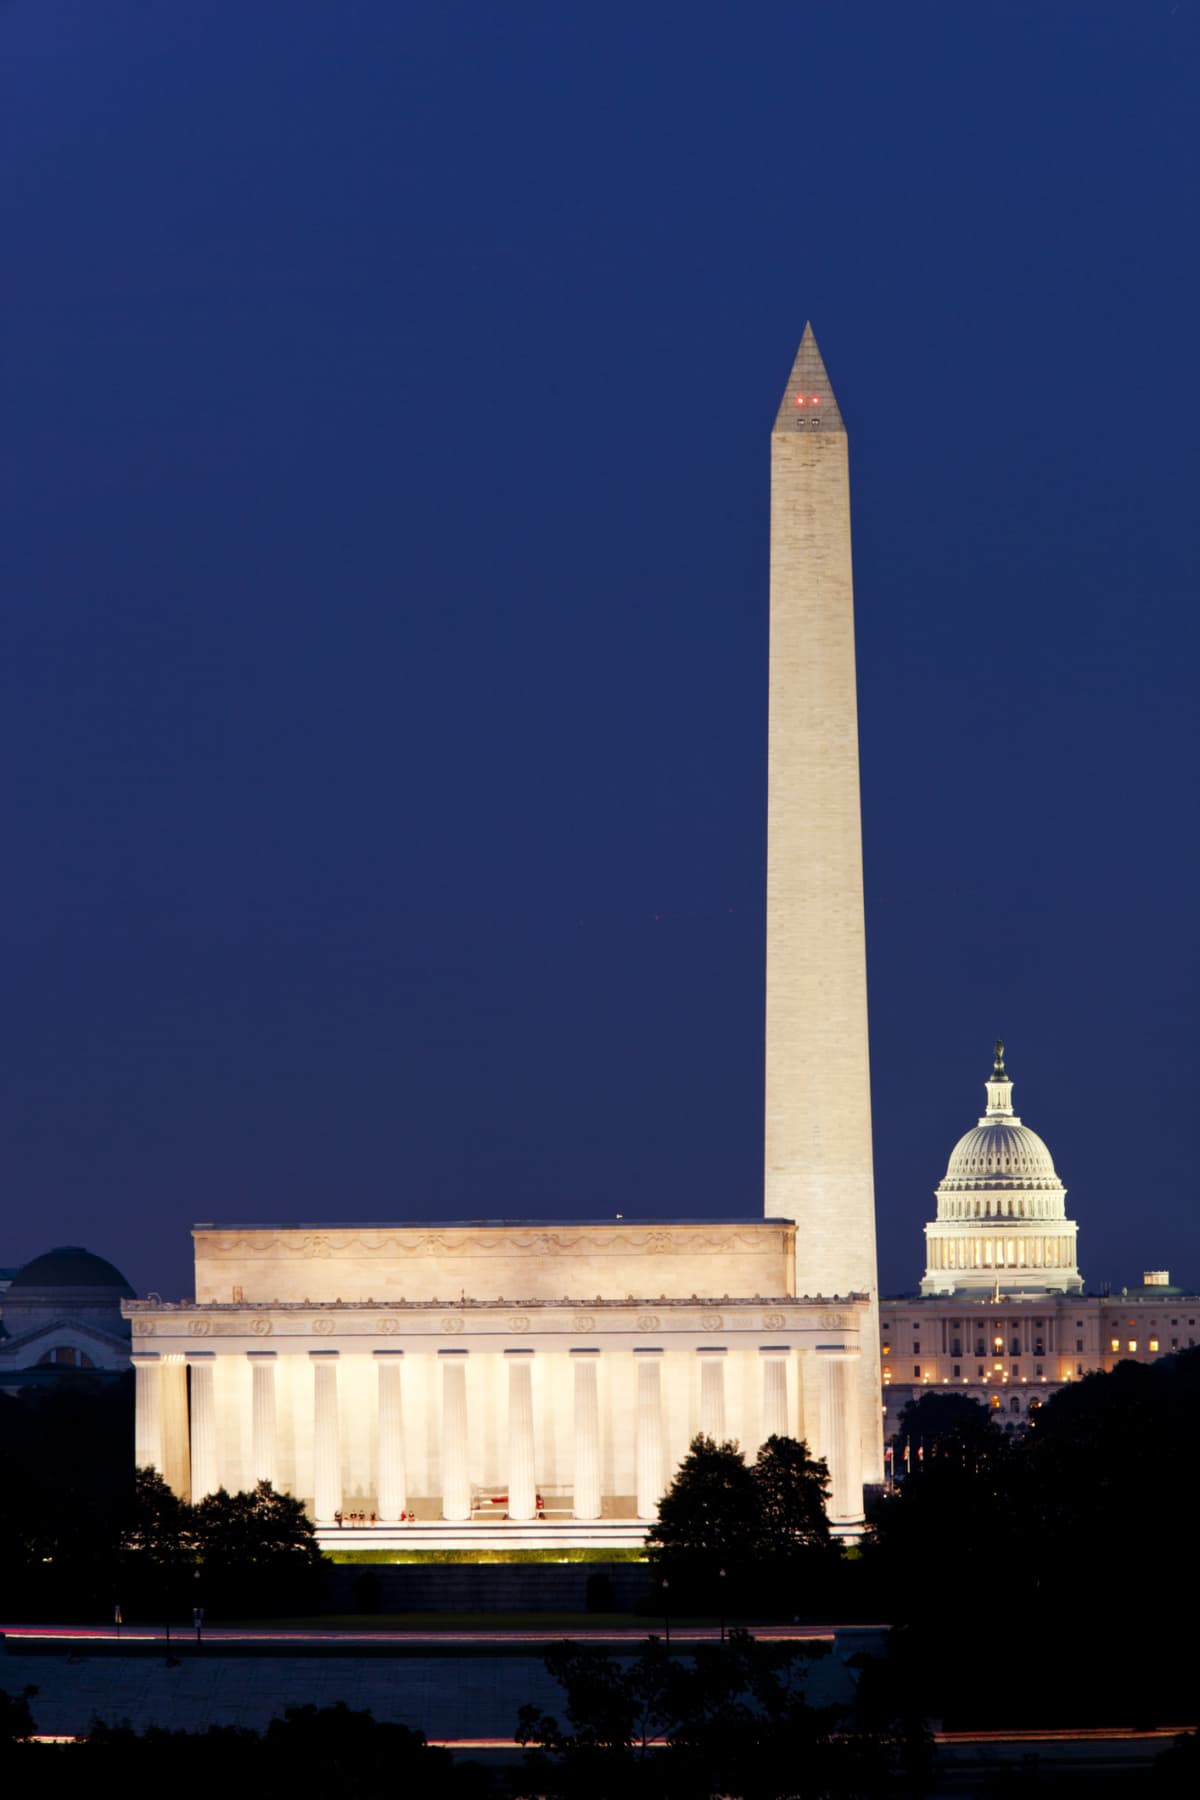 The Washington Monument on the National Mall at night